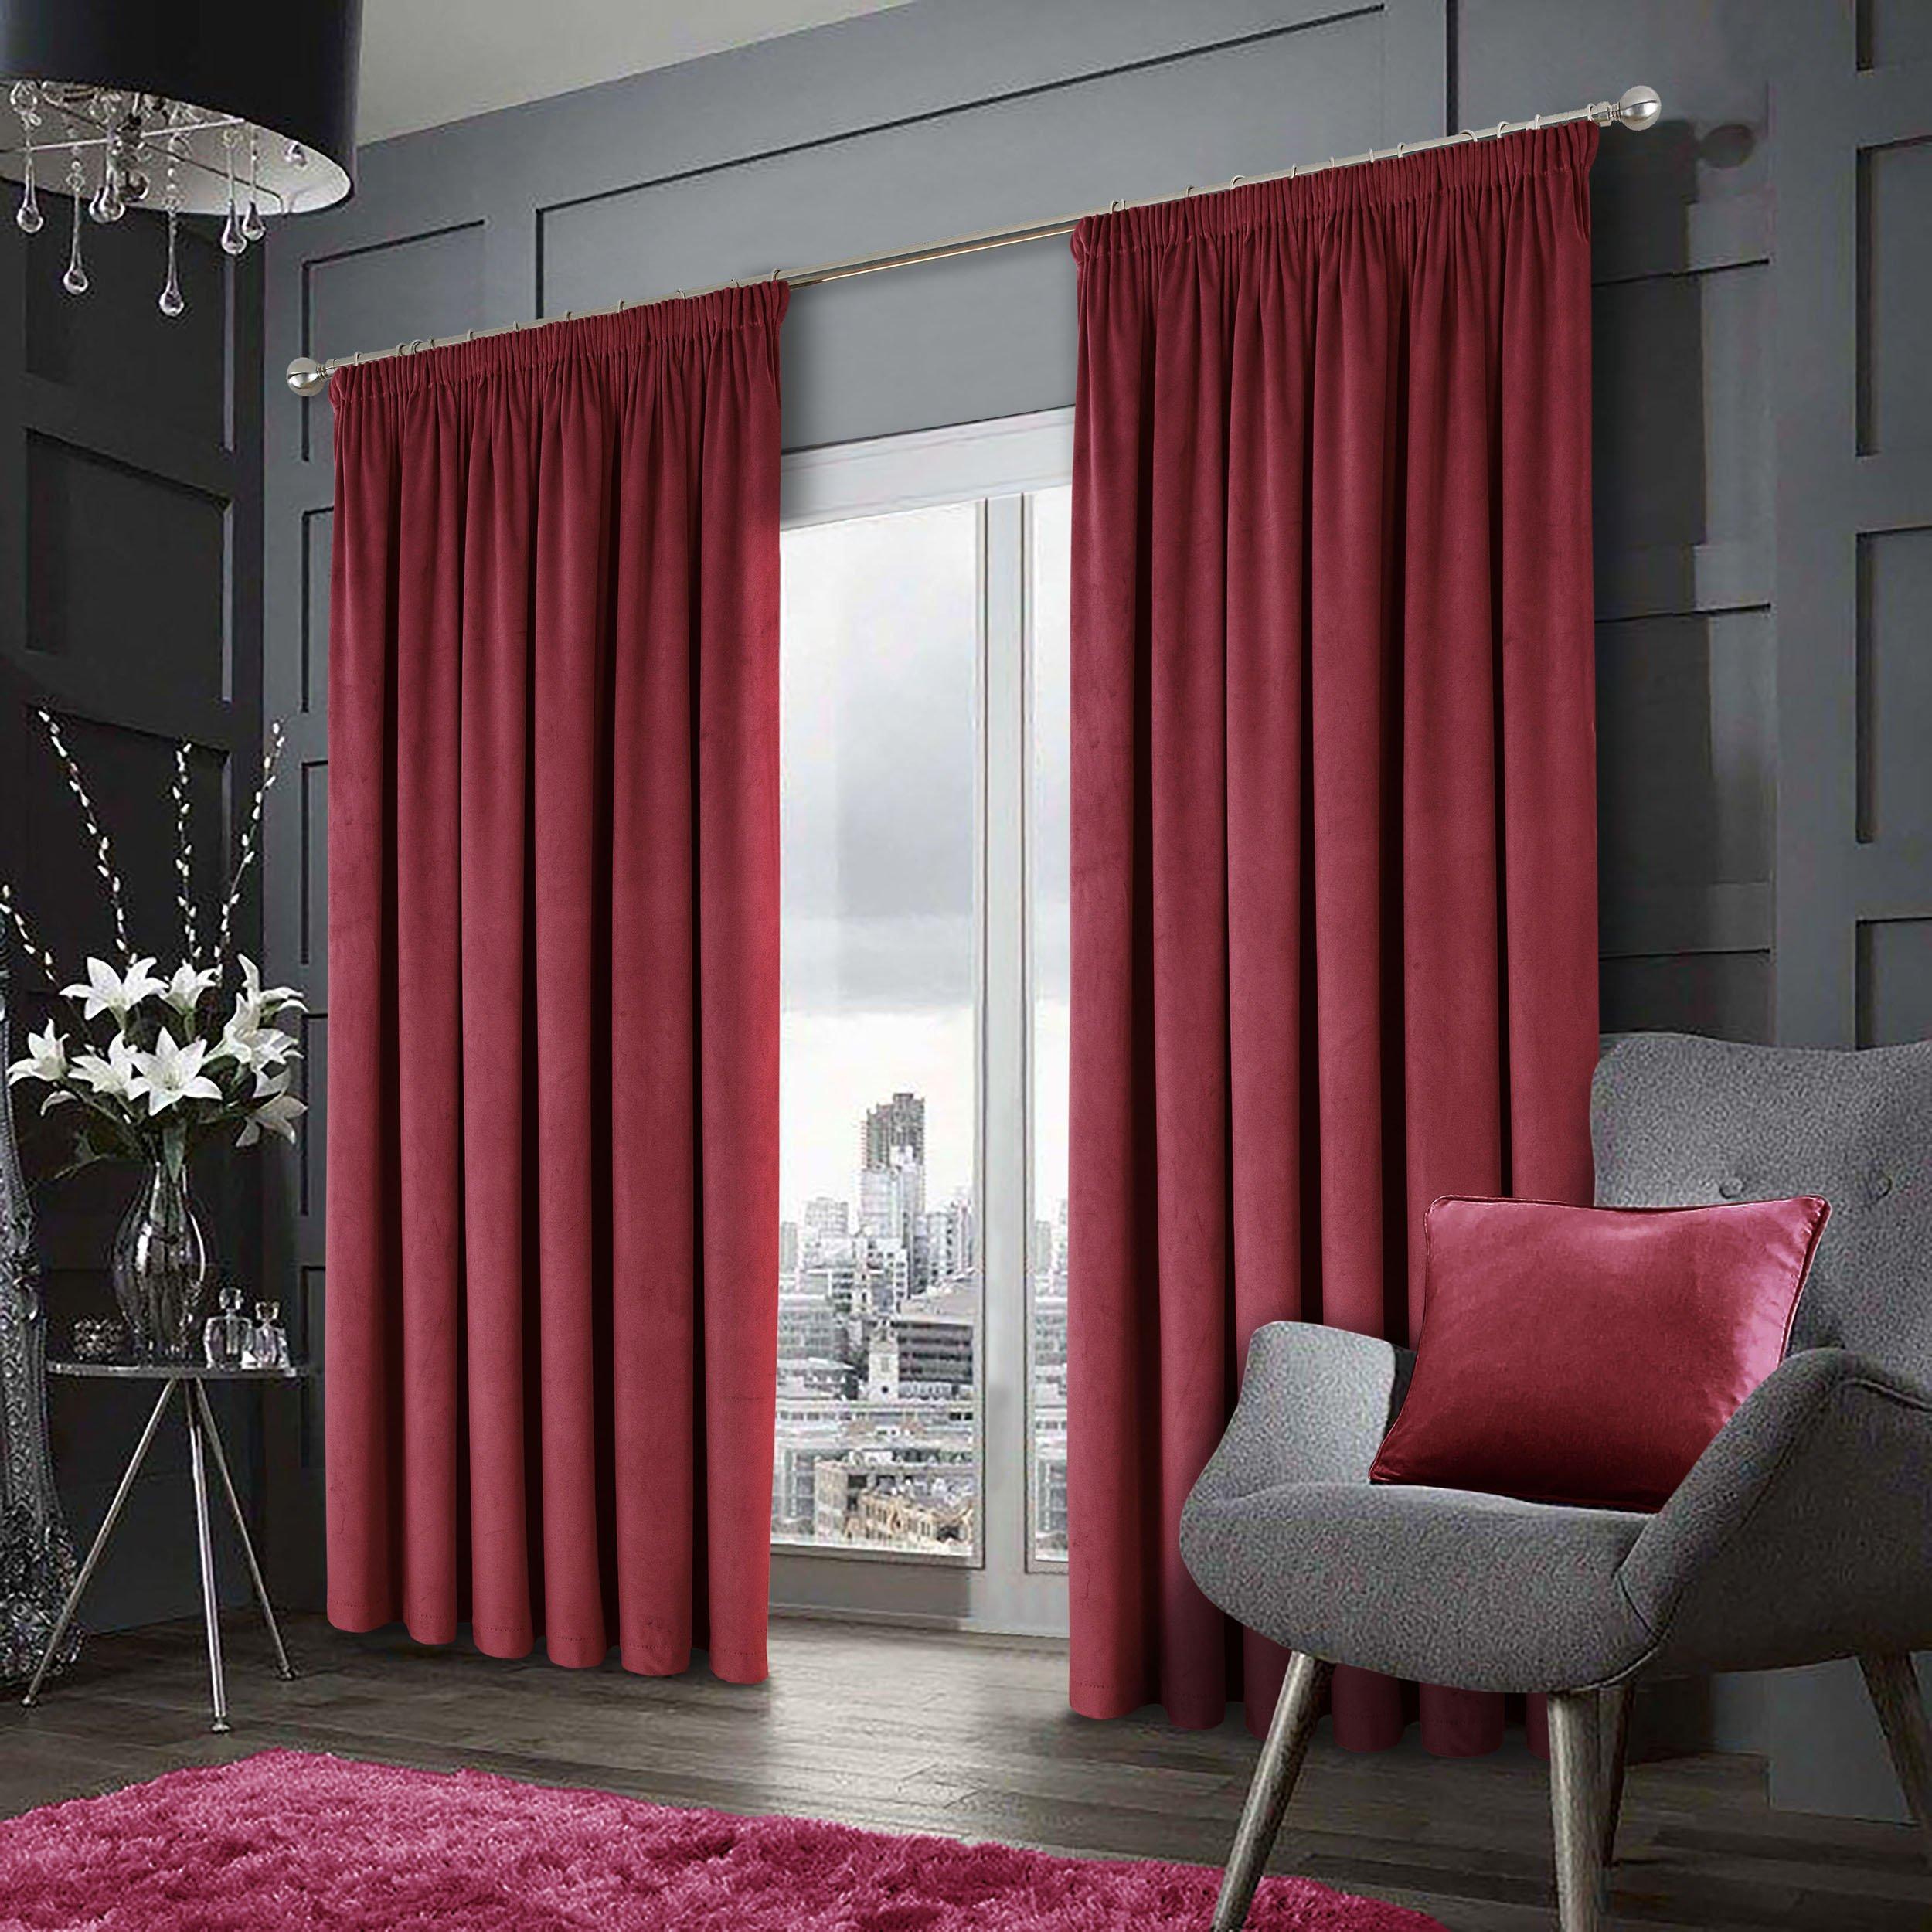 Montreal Soft Velour 3 inch Pencil Pleat Curtains pair